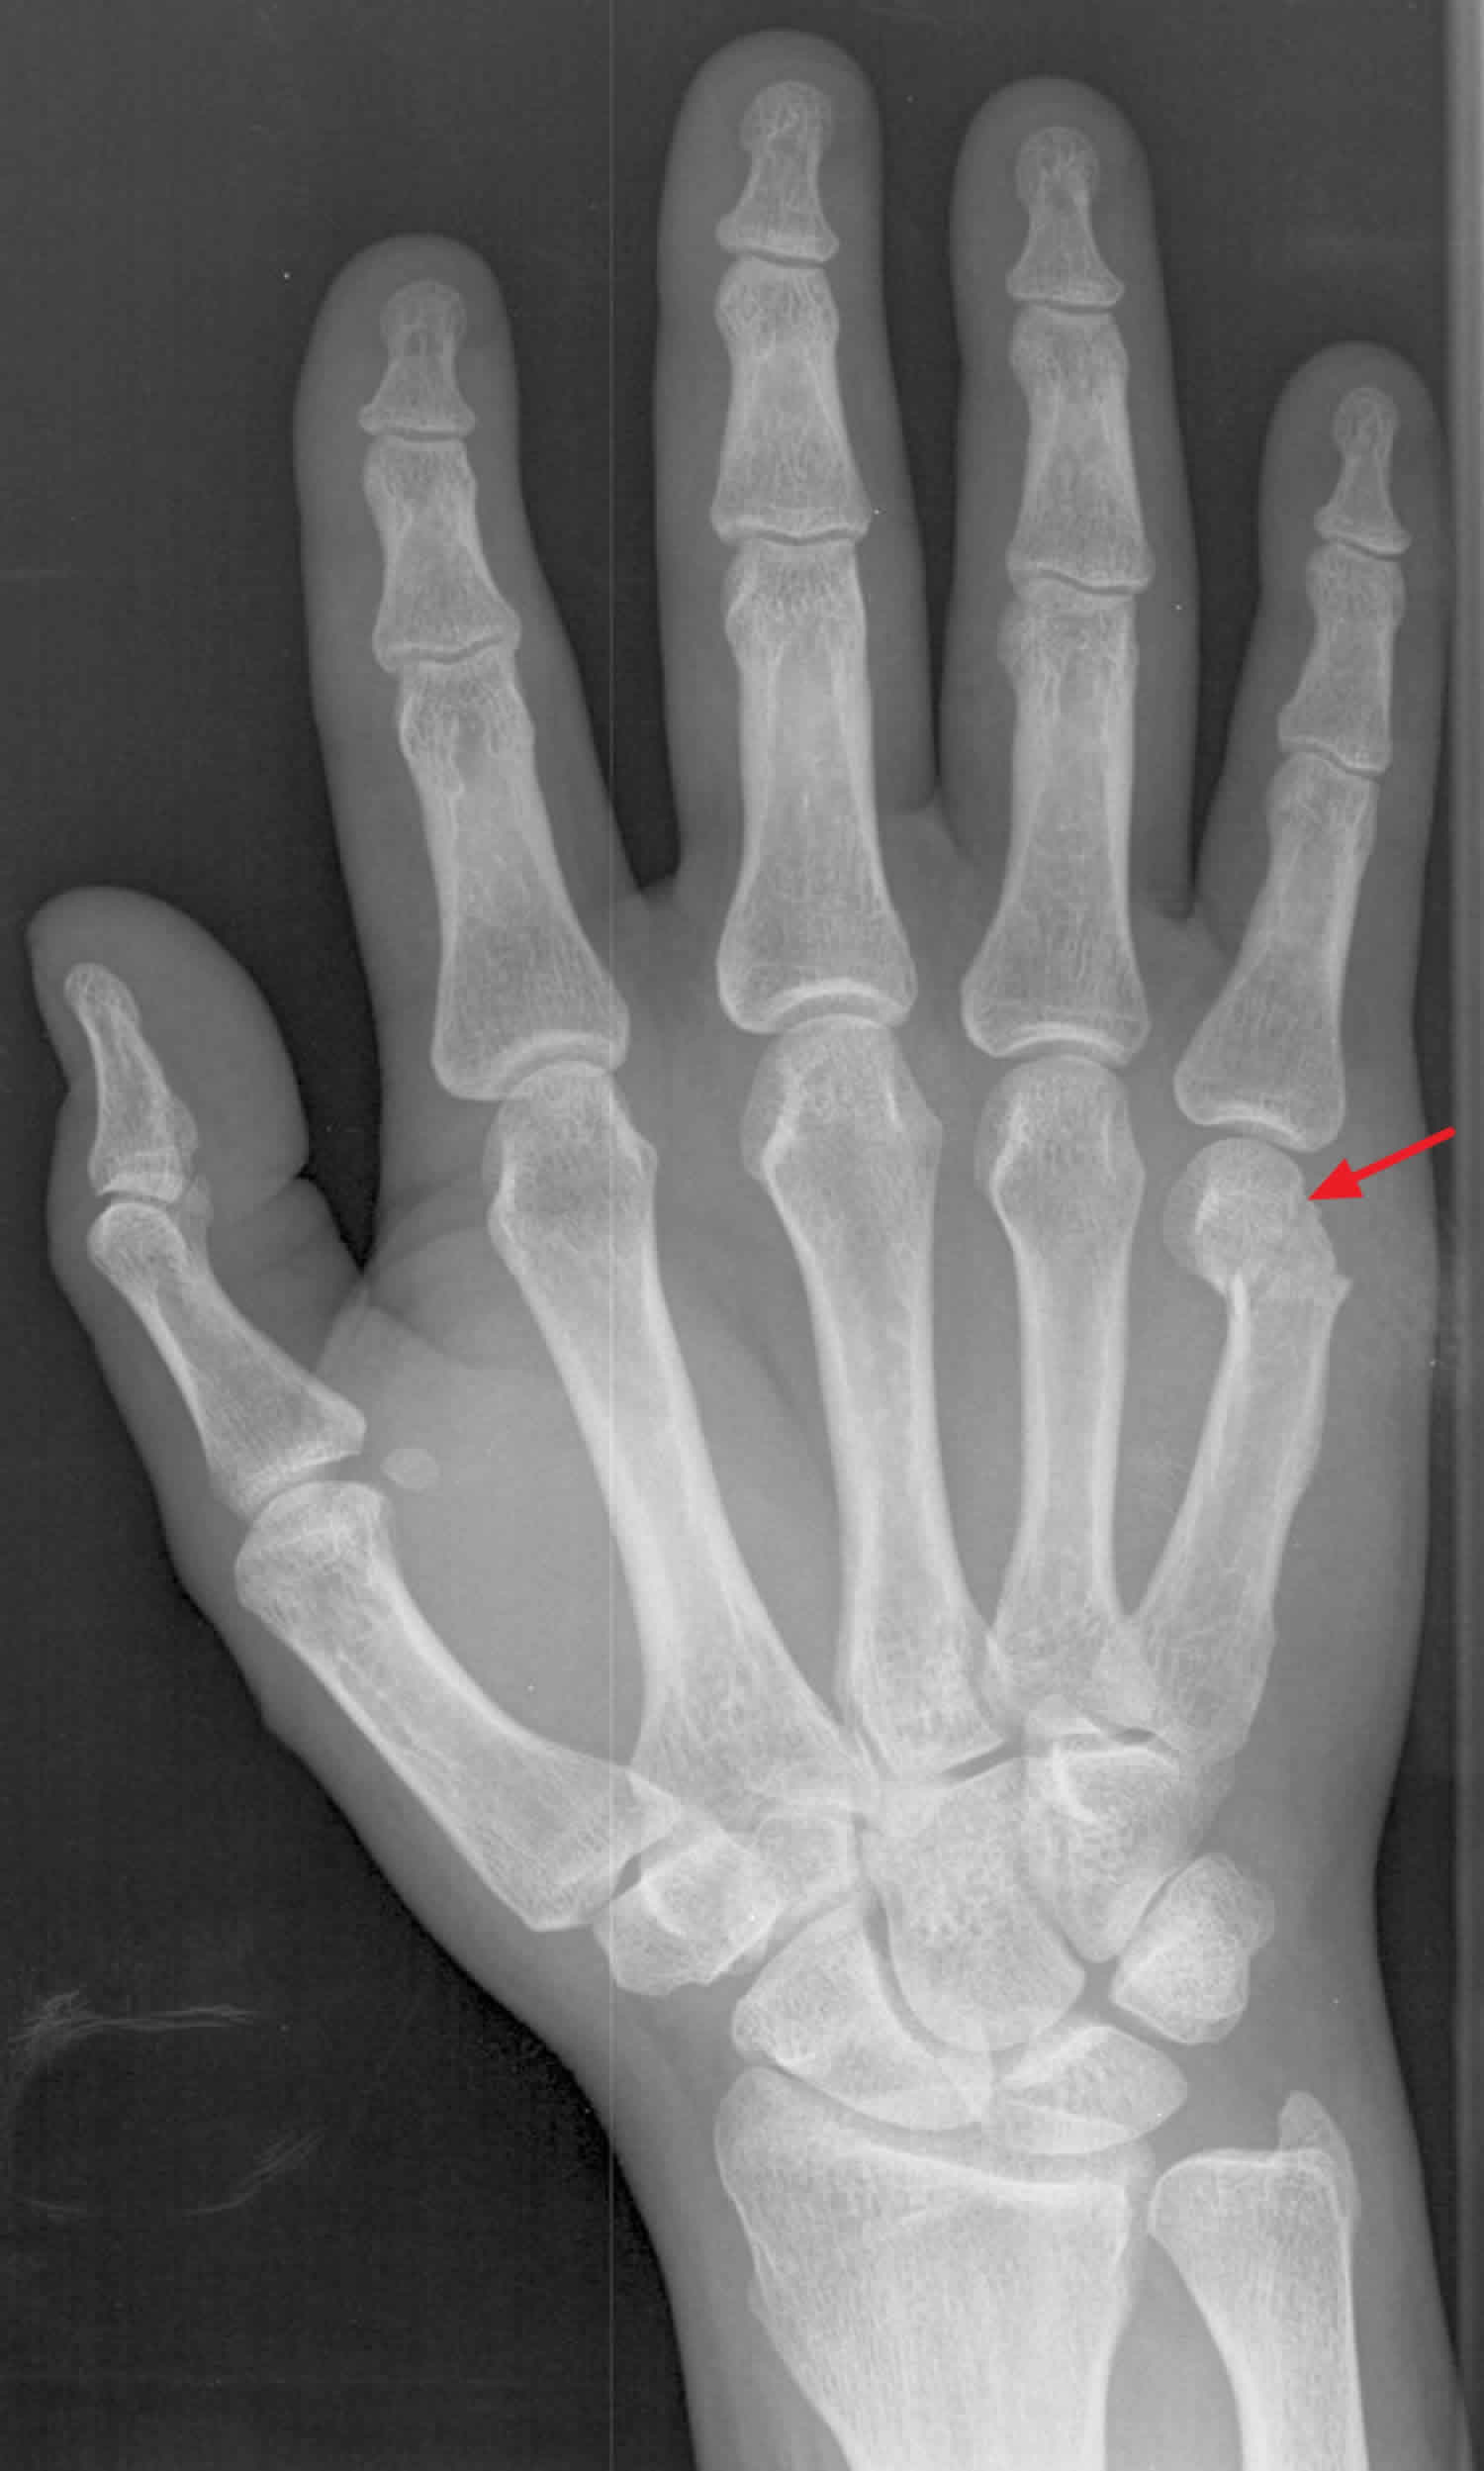 fifth metacarpal fracture treatment